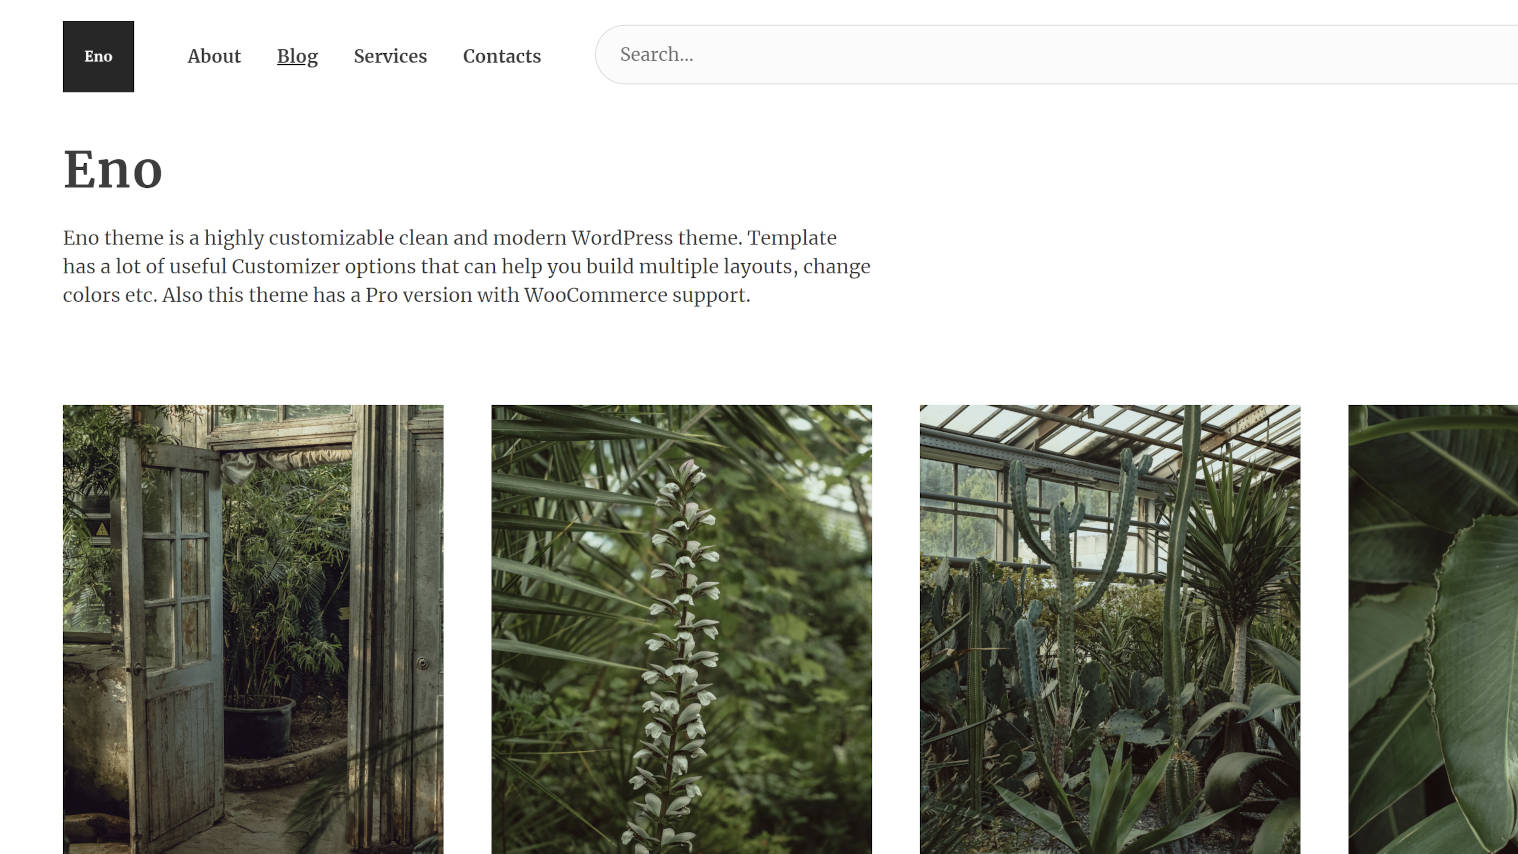 Enō: ‘Probably This Is the Best Blogging Theme Ever’